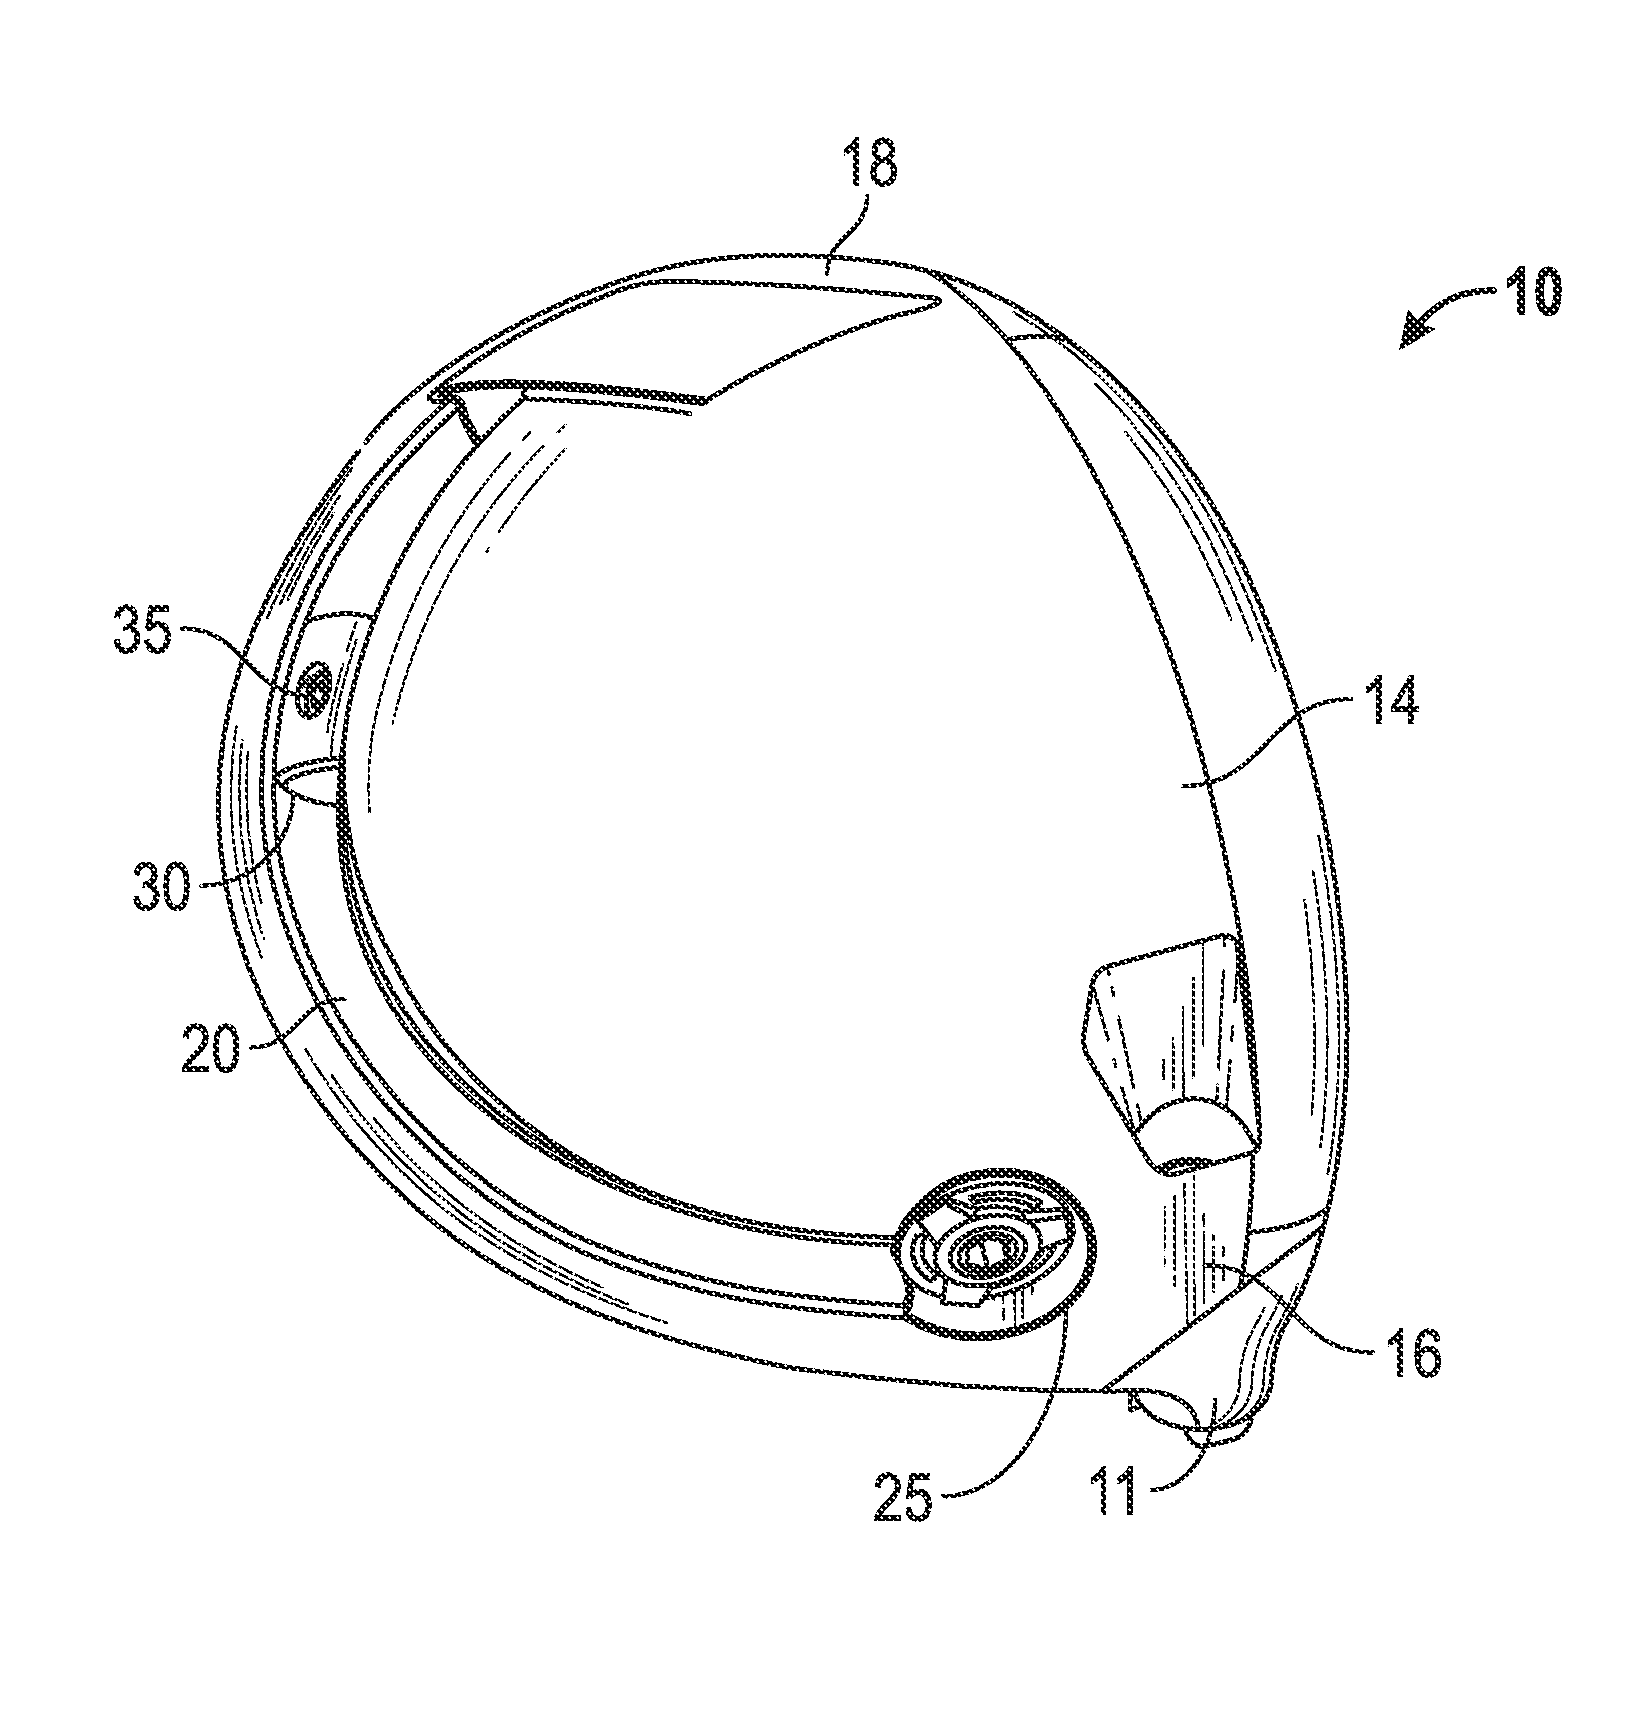 Golf club head with adjustable center of gravity